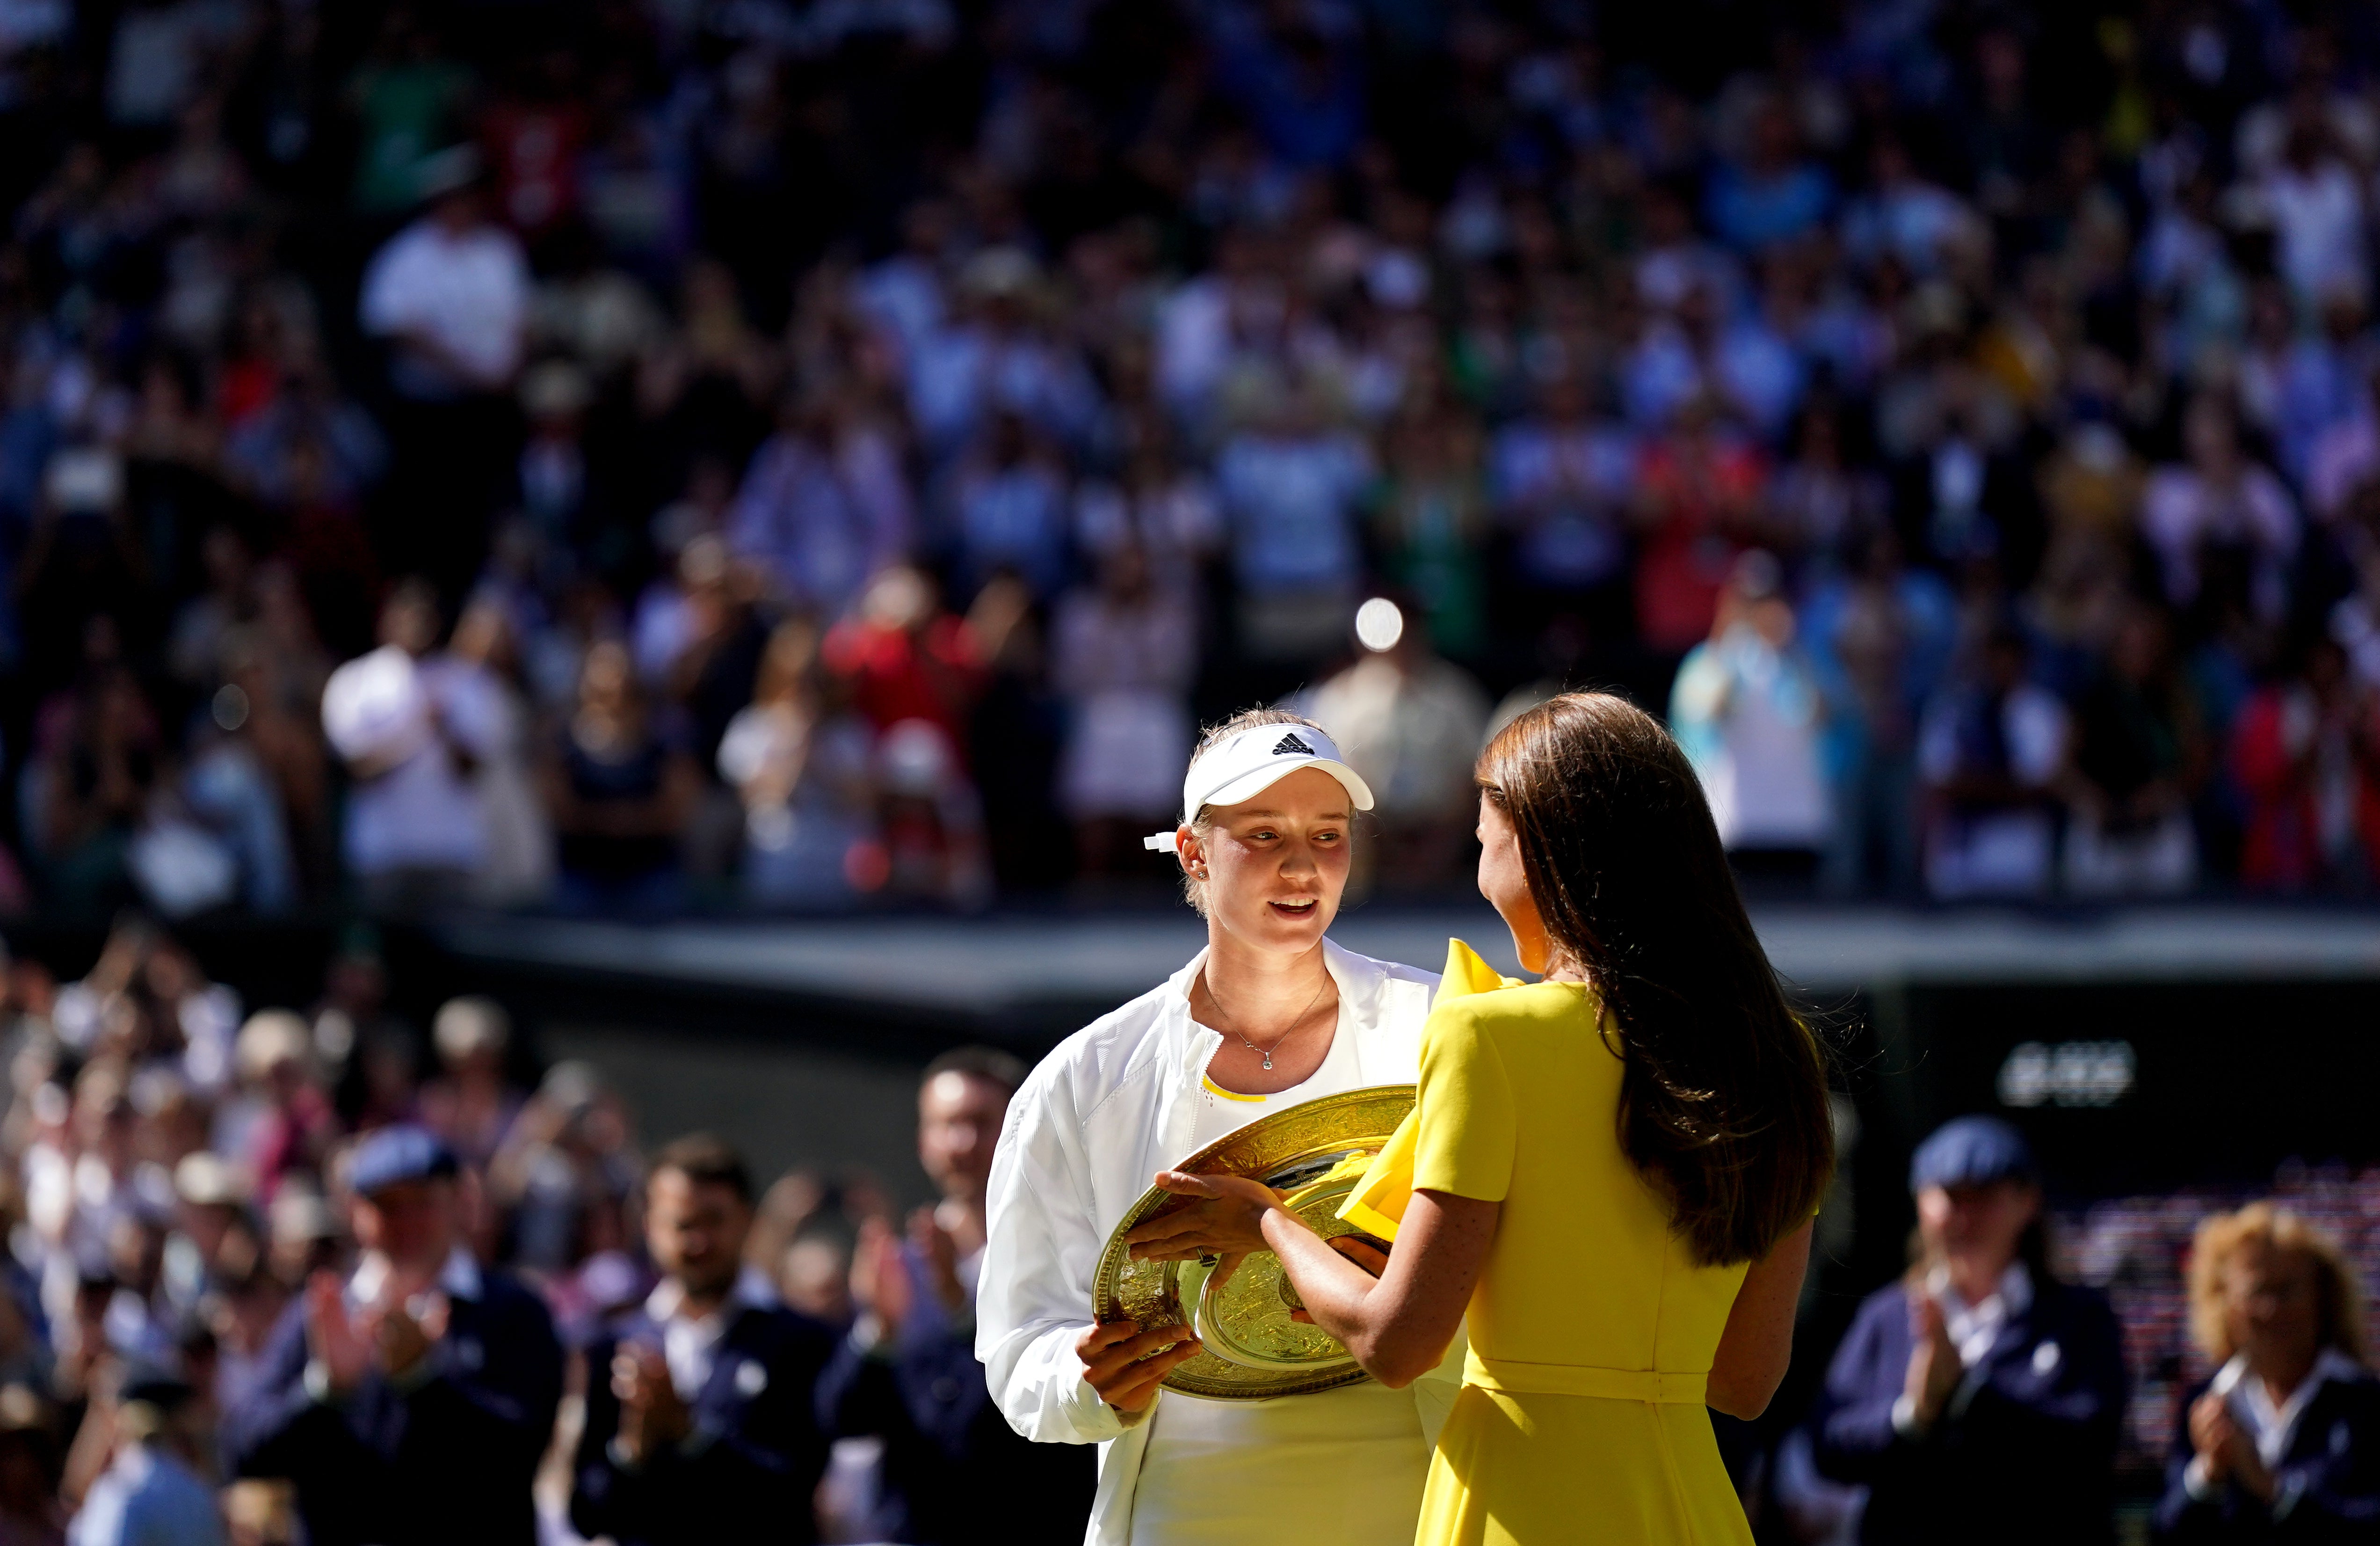 Elena Rybakina is presented with the trophy by the Duchess of Cambridge (Zac Goodwin/PA)